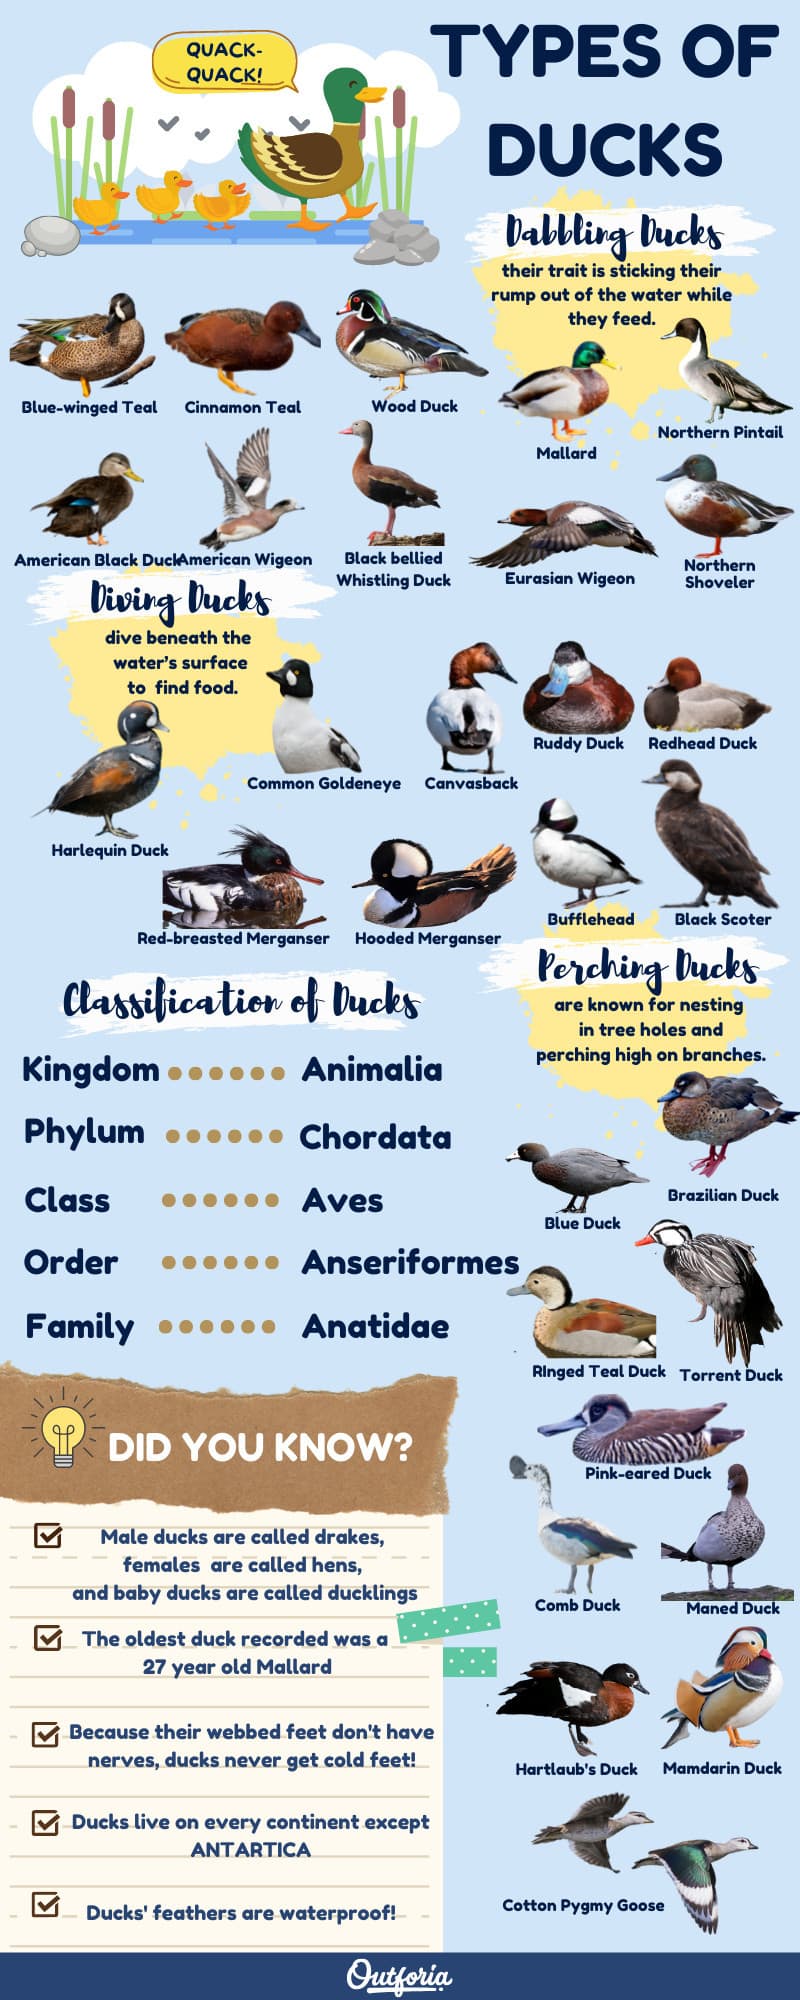 Types of Ducks Infographic outlining 30 species of ducks with pictures and names, as well as facts about their classification and fun facts